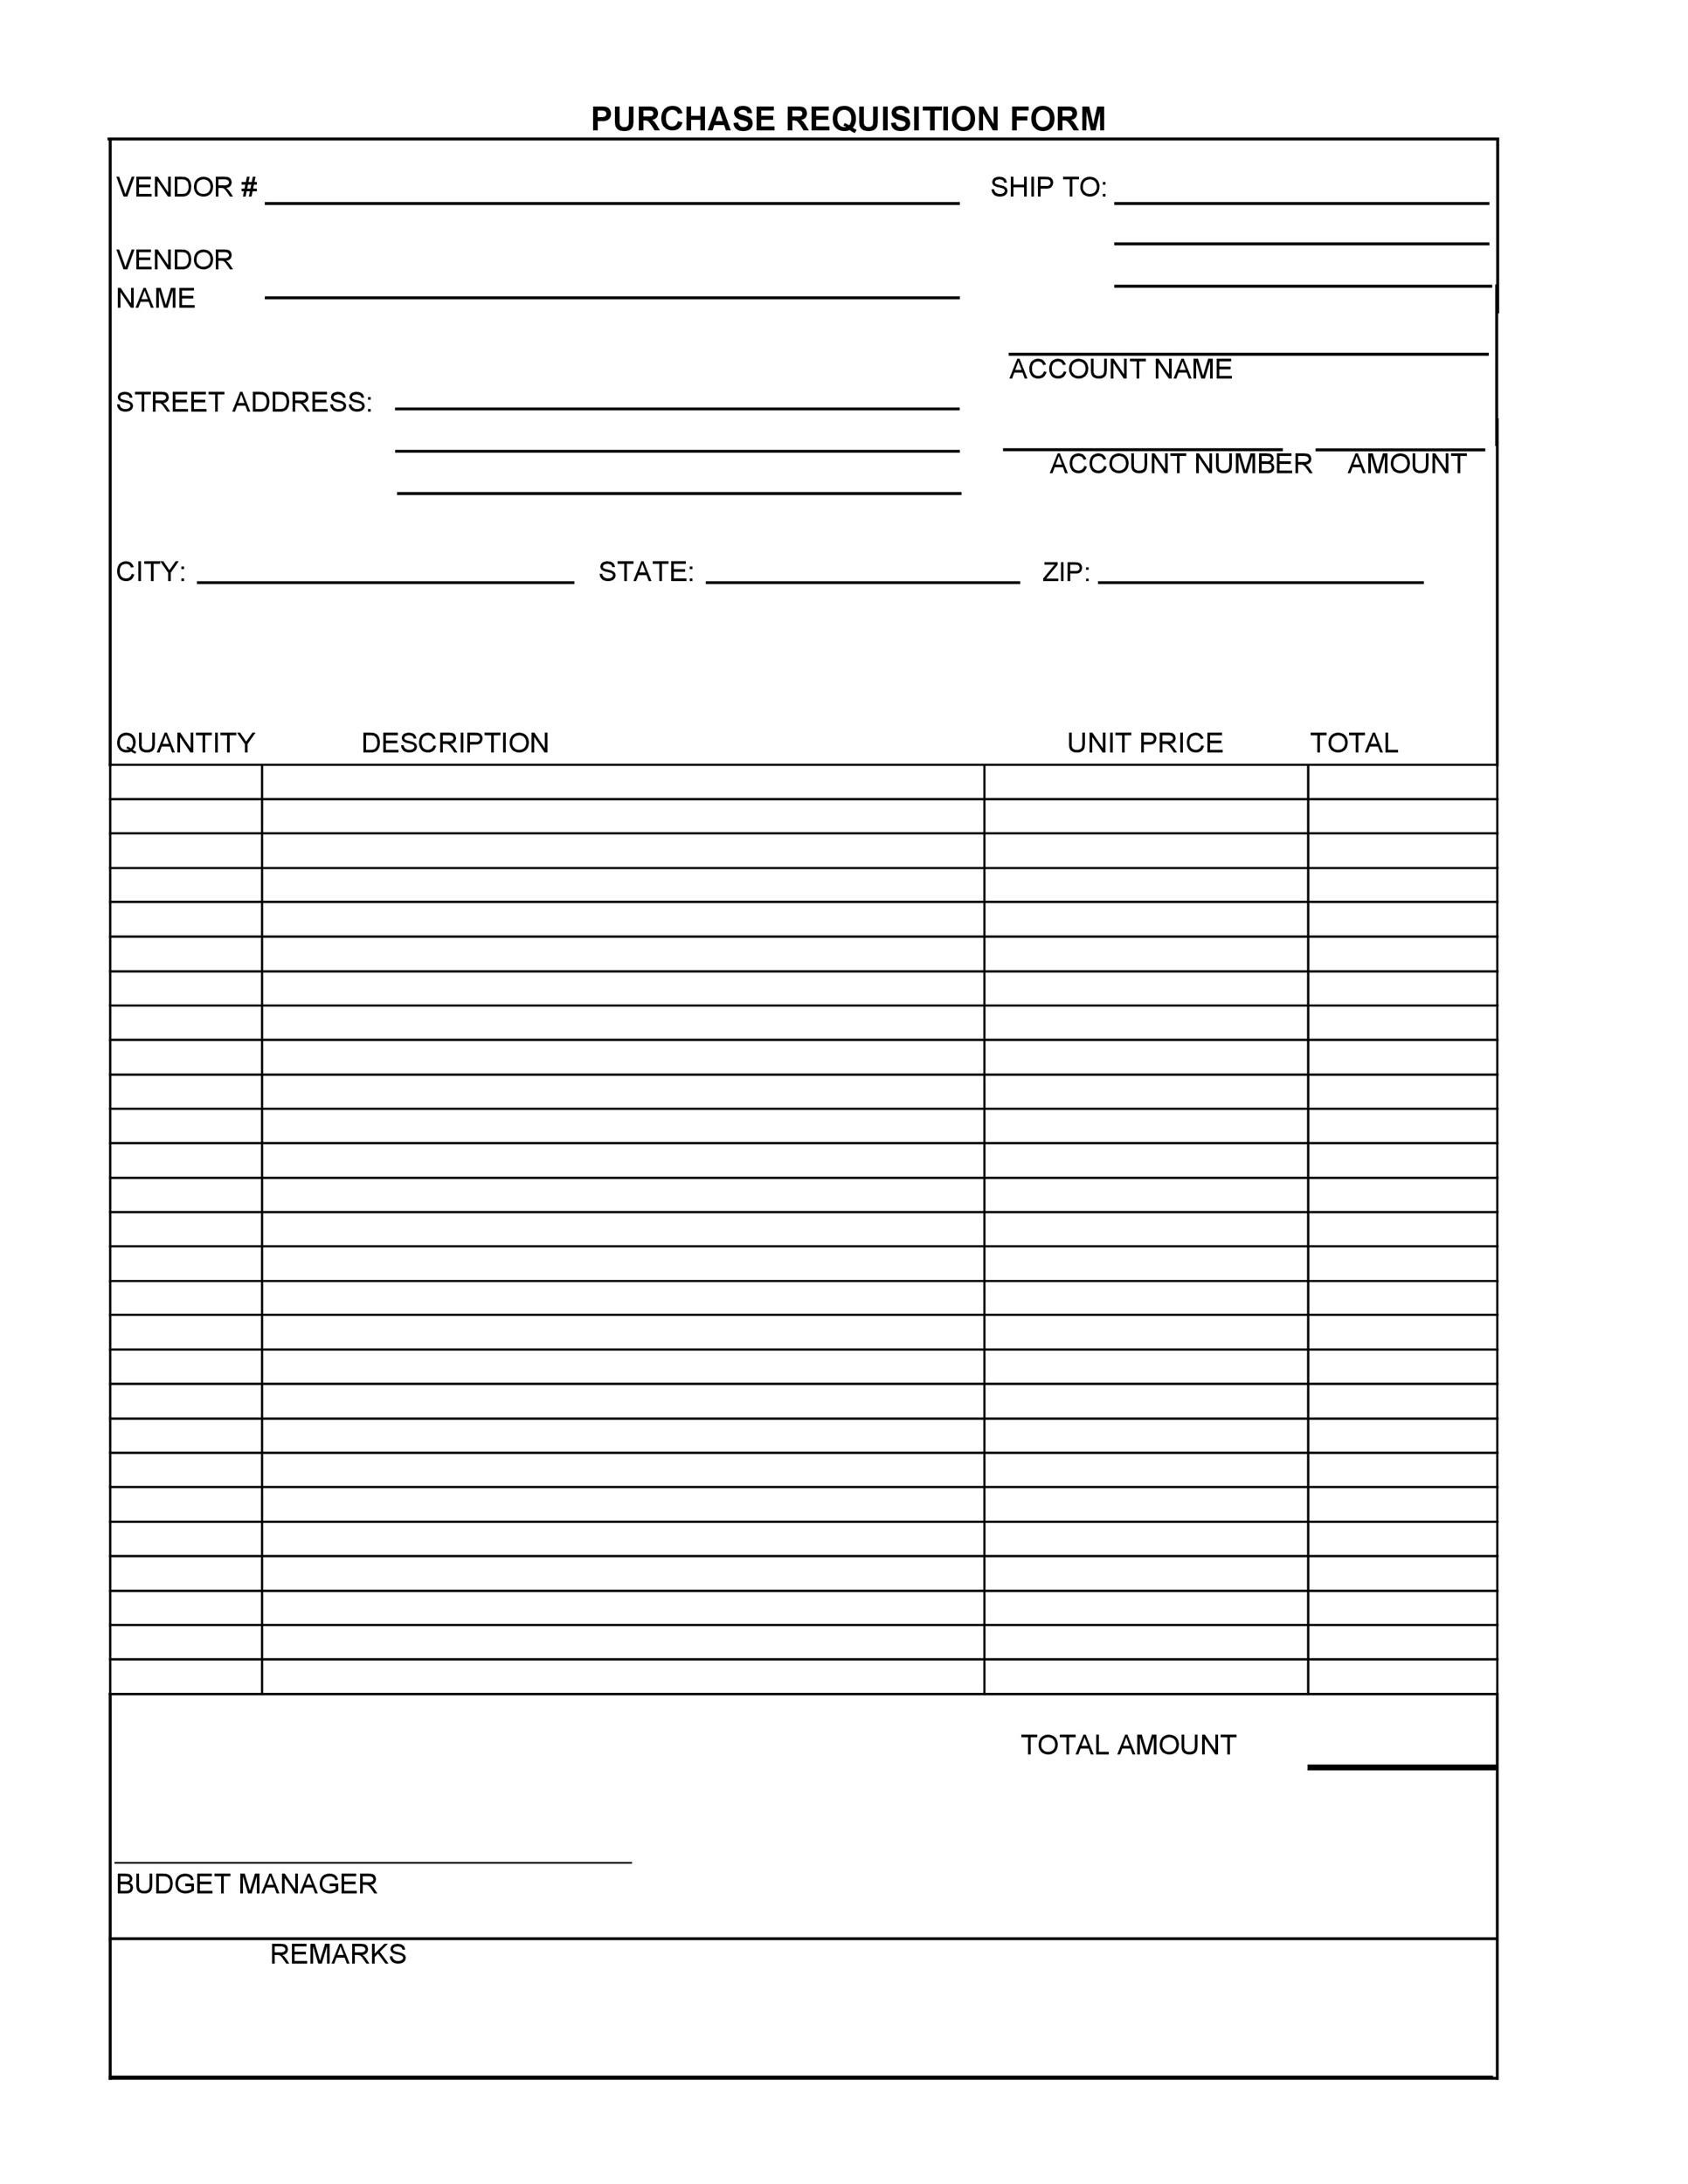 Parts Requisition Form Template from templatelab.com